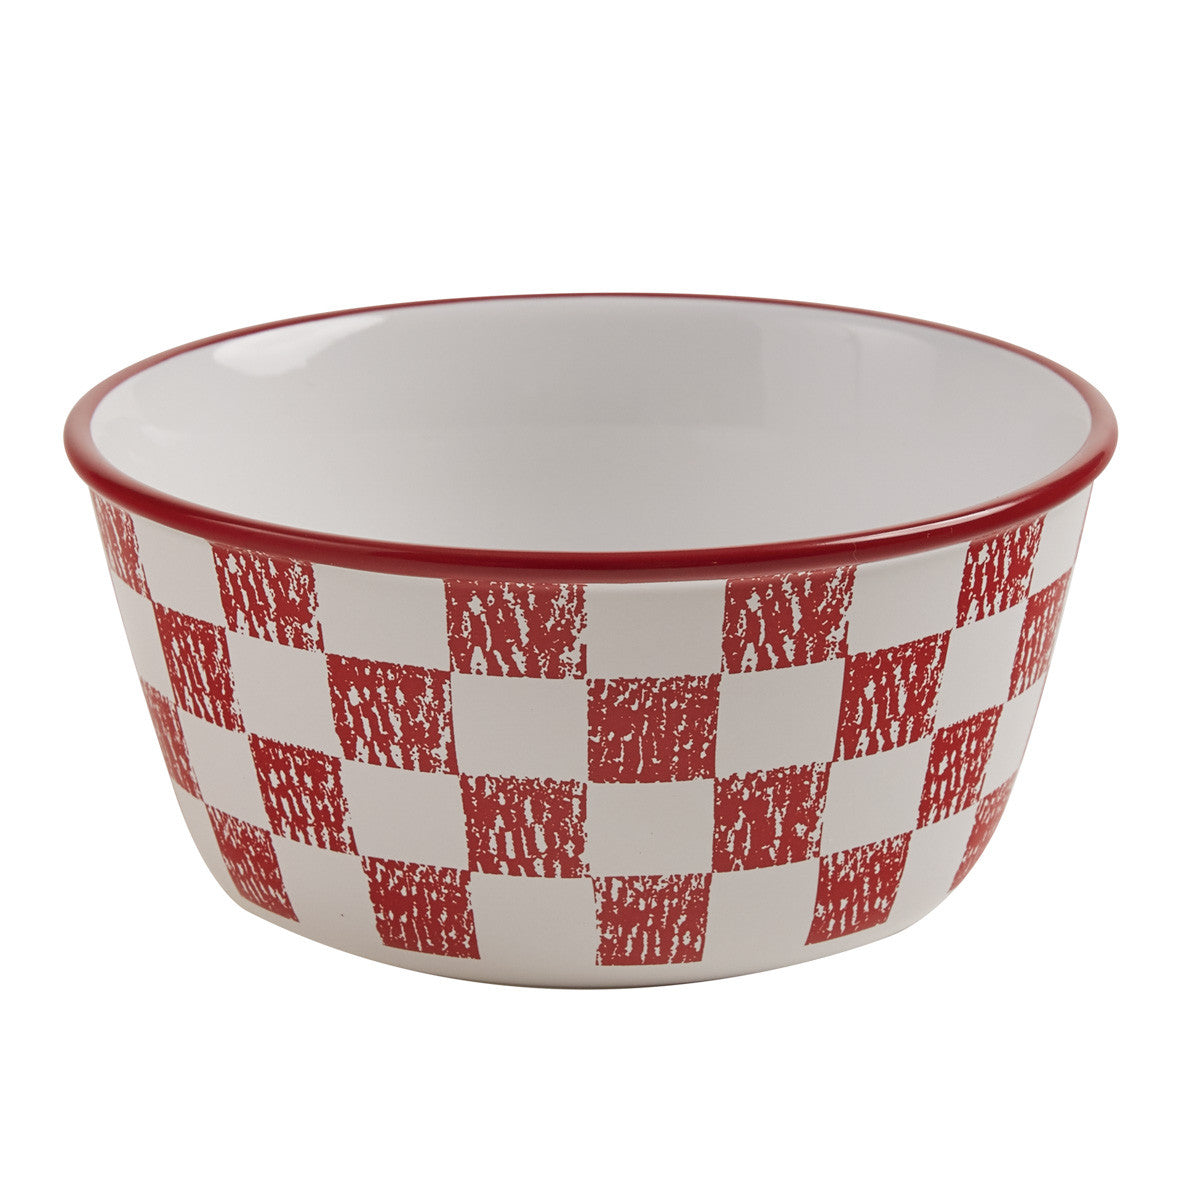 Chicken Coop Cereal Bowl- Check